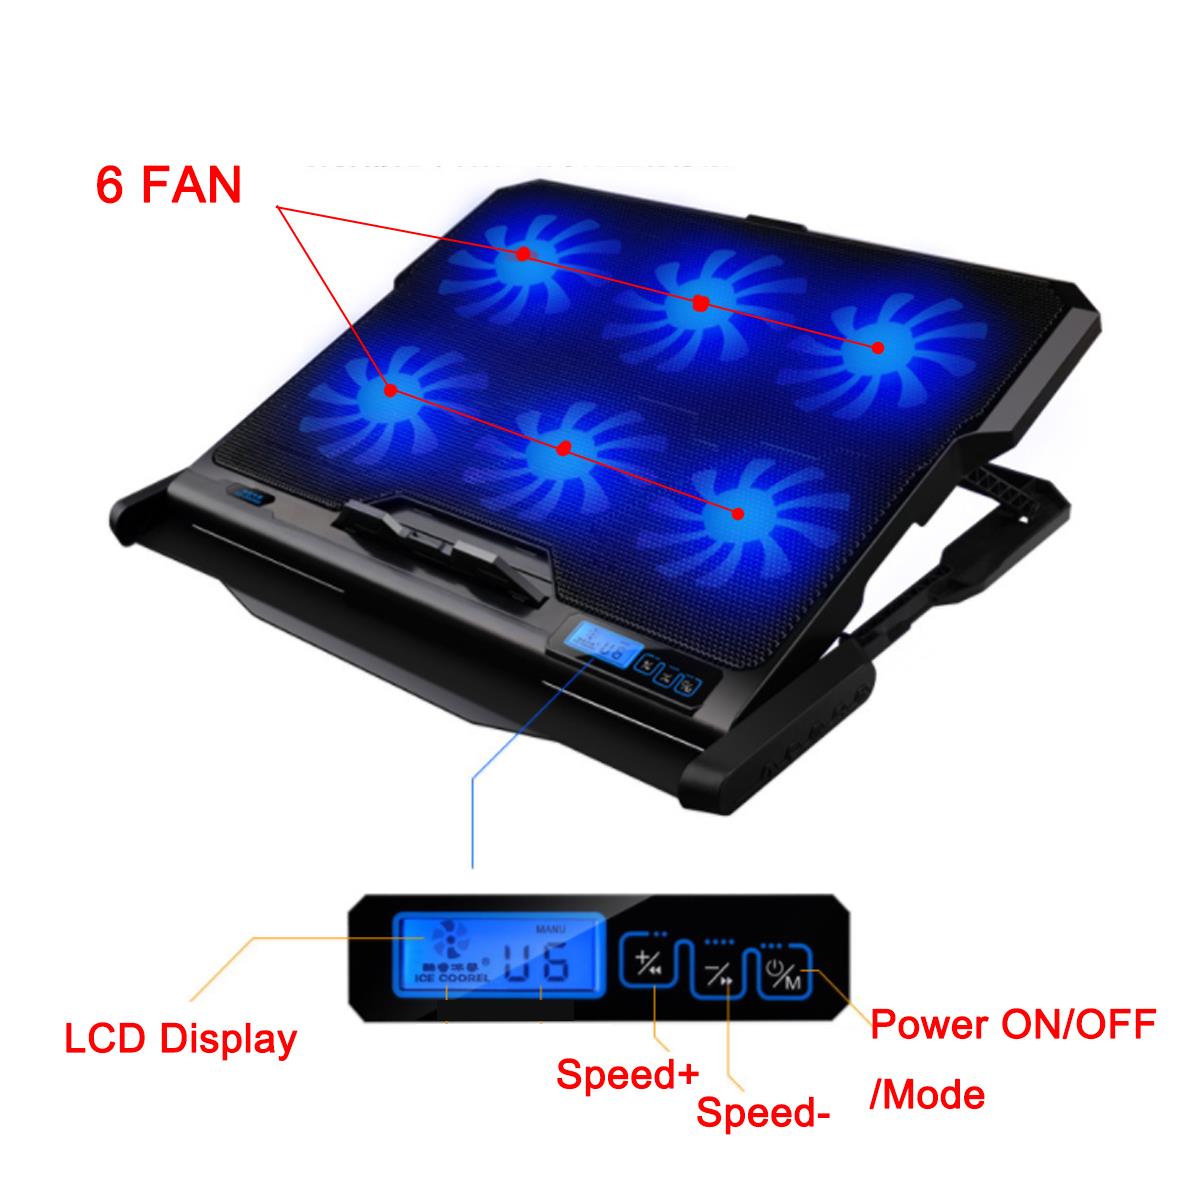 Adjustable-Laptop-Cooling-Pad-USB-Cooler-6-Cooling-Fans-With-Stand-For-12-156-inch-Laptop-Use-1303803